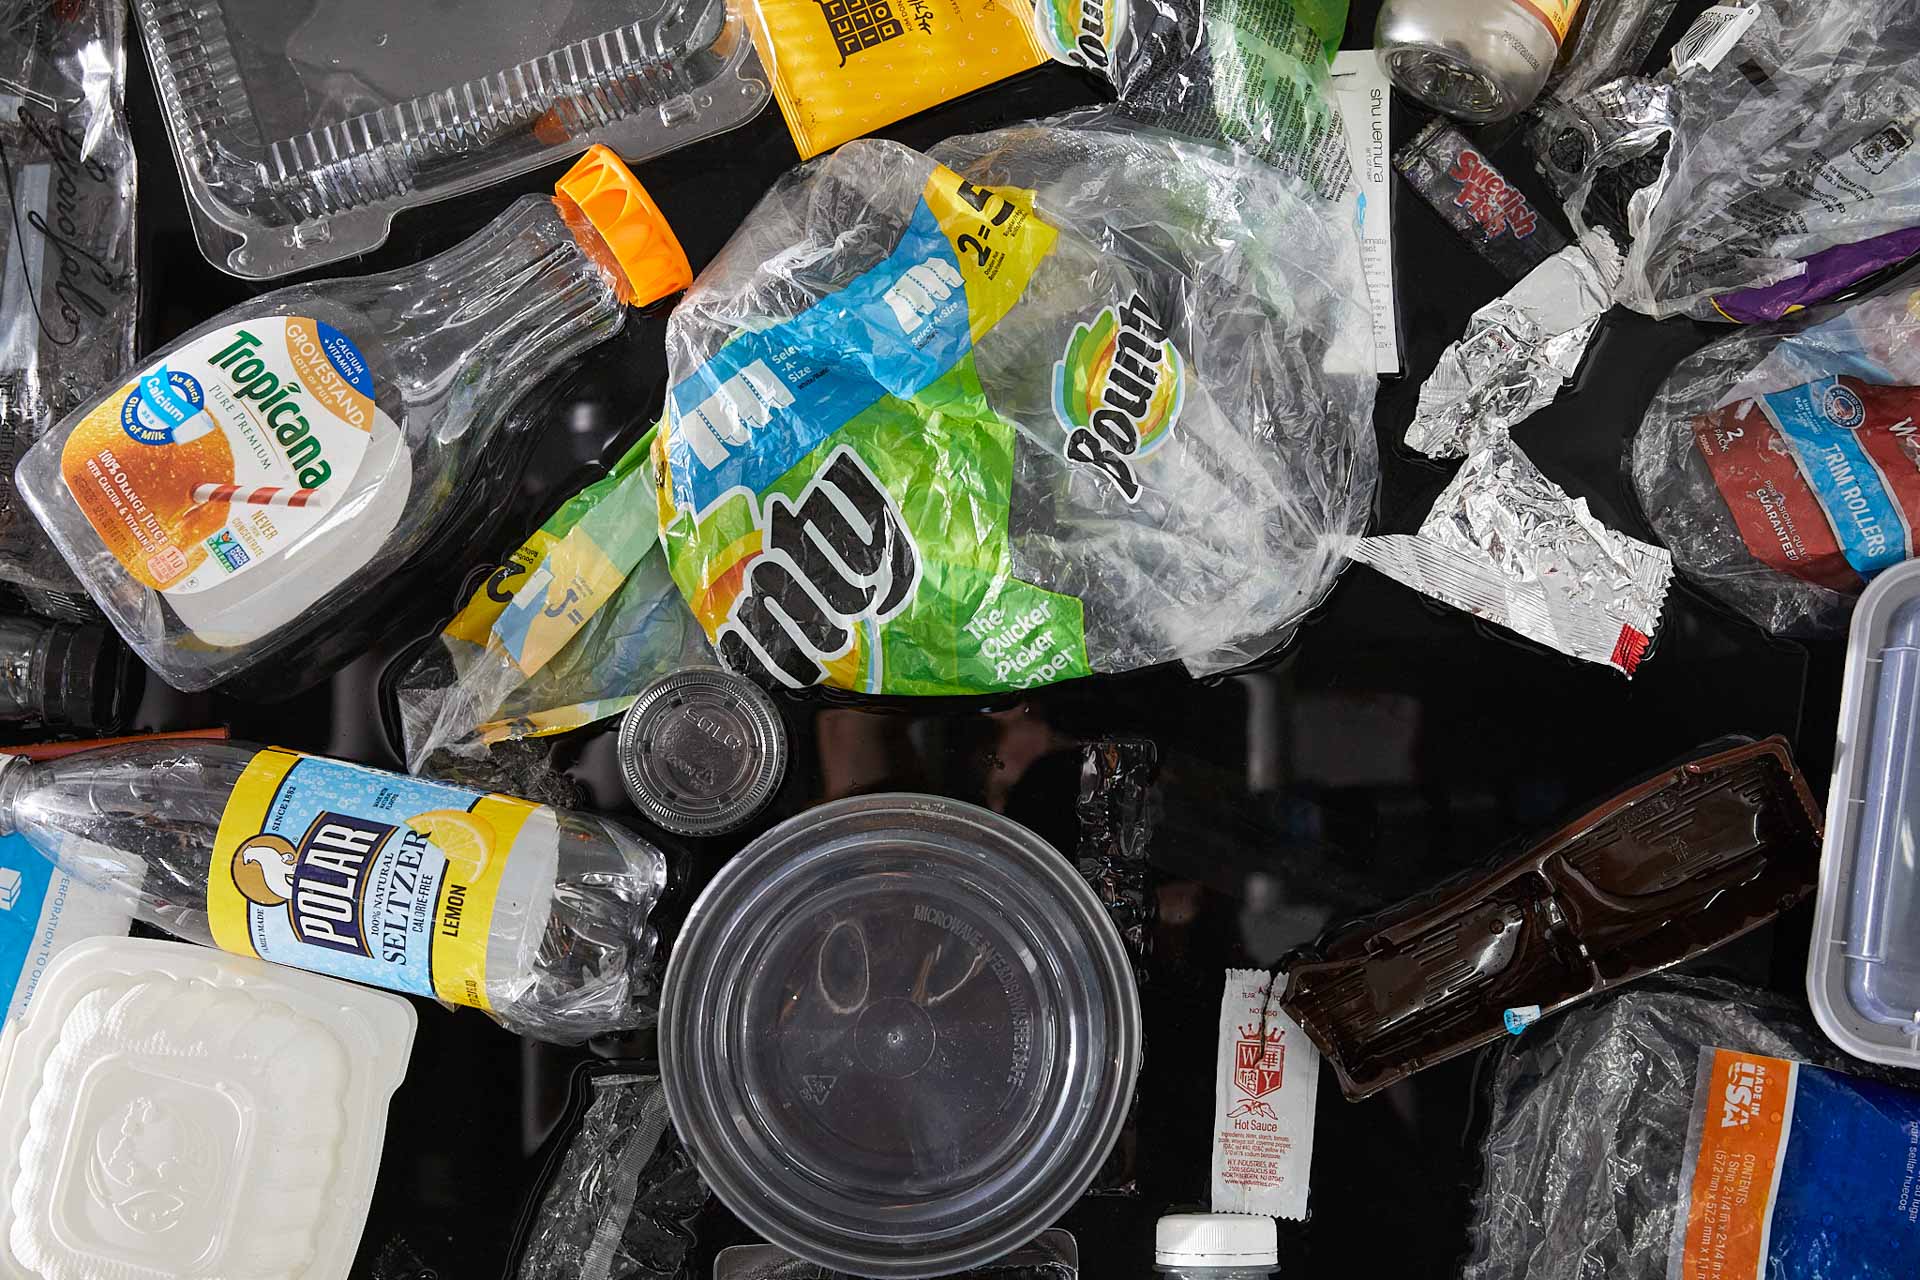 Tight close-up photograph of about 20 single-use plastic items jumbled together. Most prominently featured is a Bounty plastic package wrapping, a Tropican organge juice bottle, and a circular take out container.